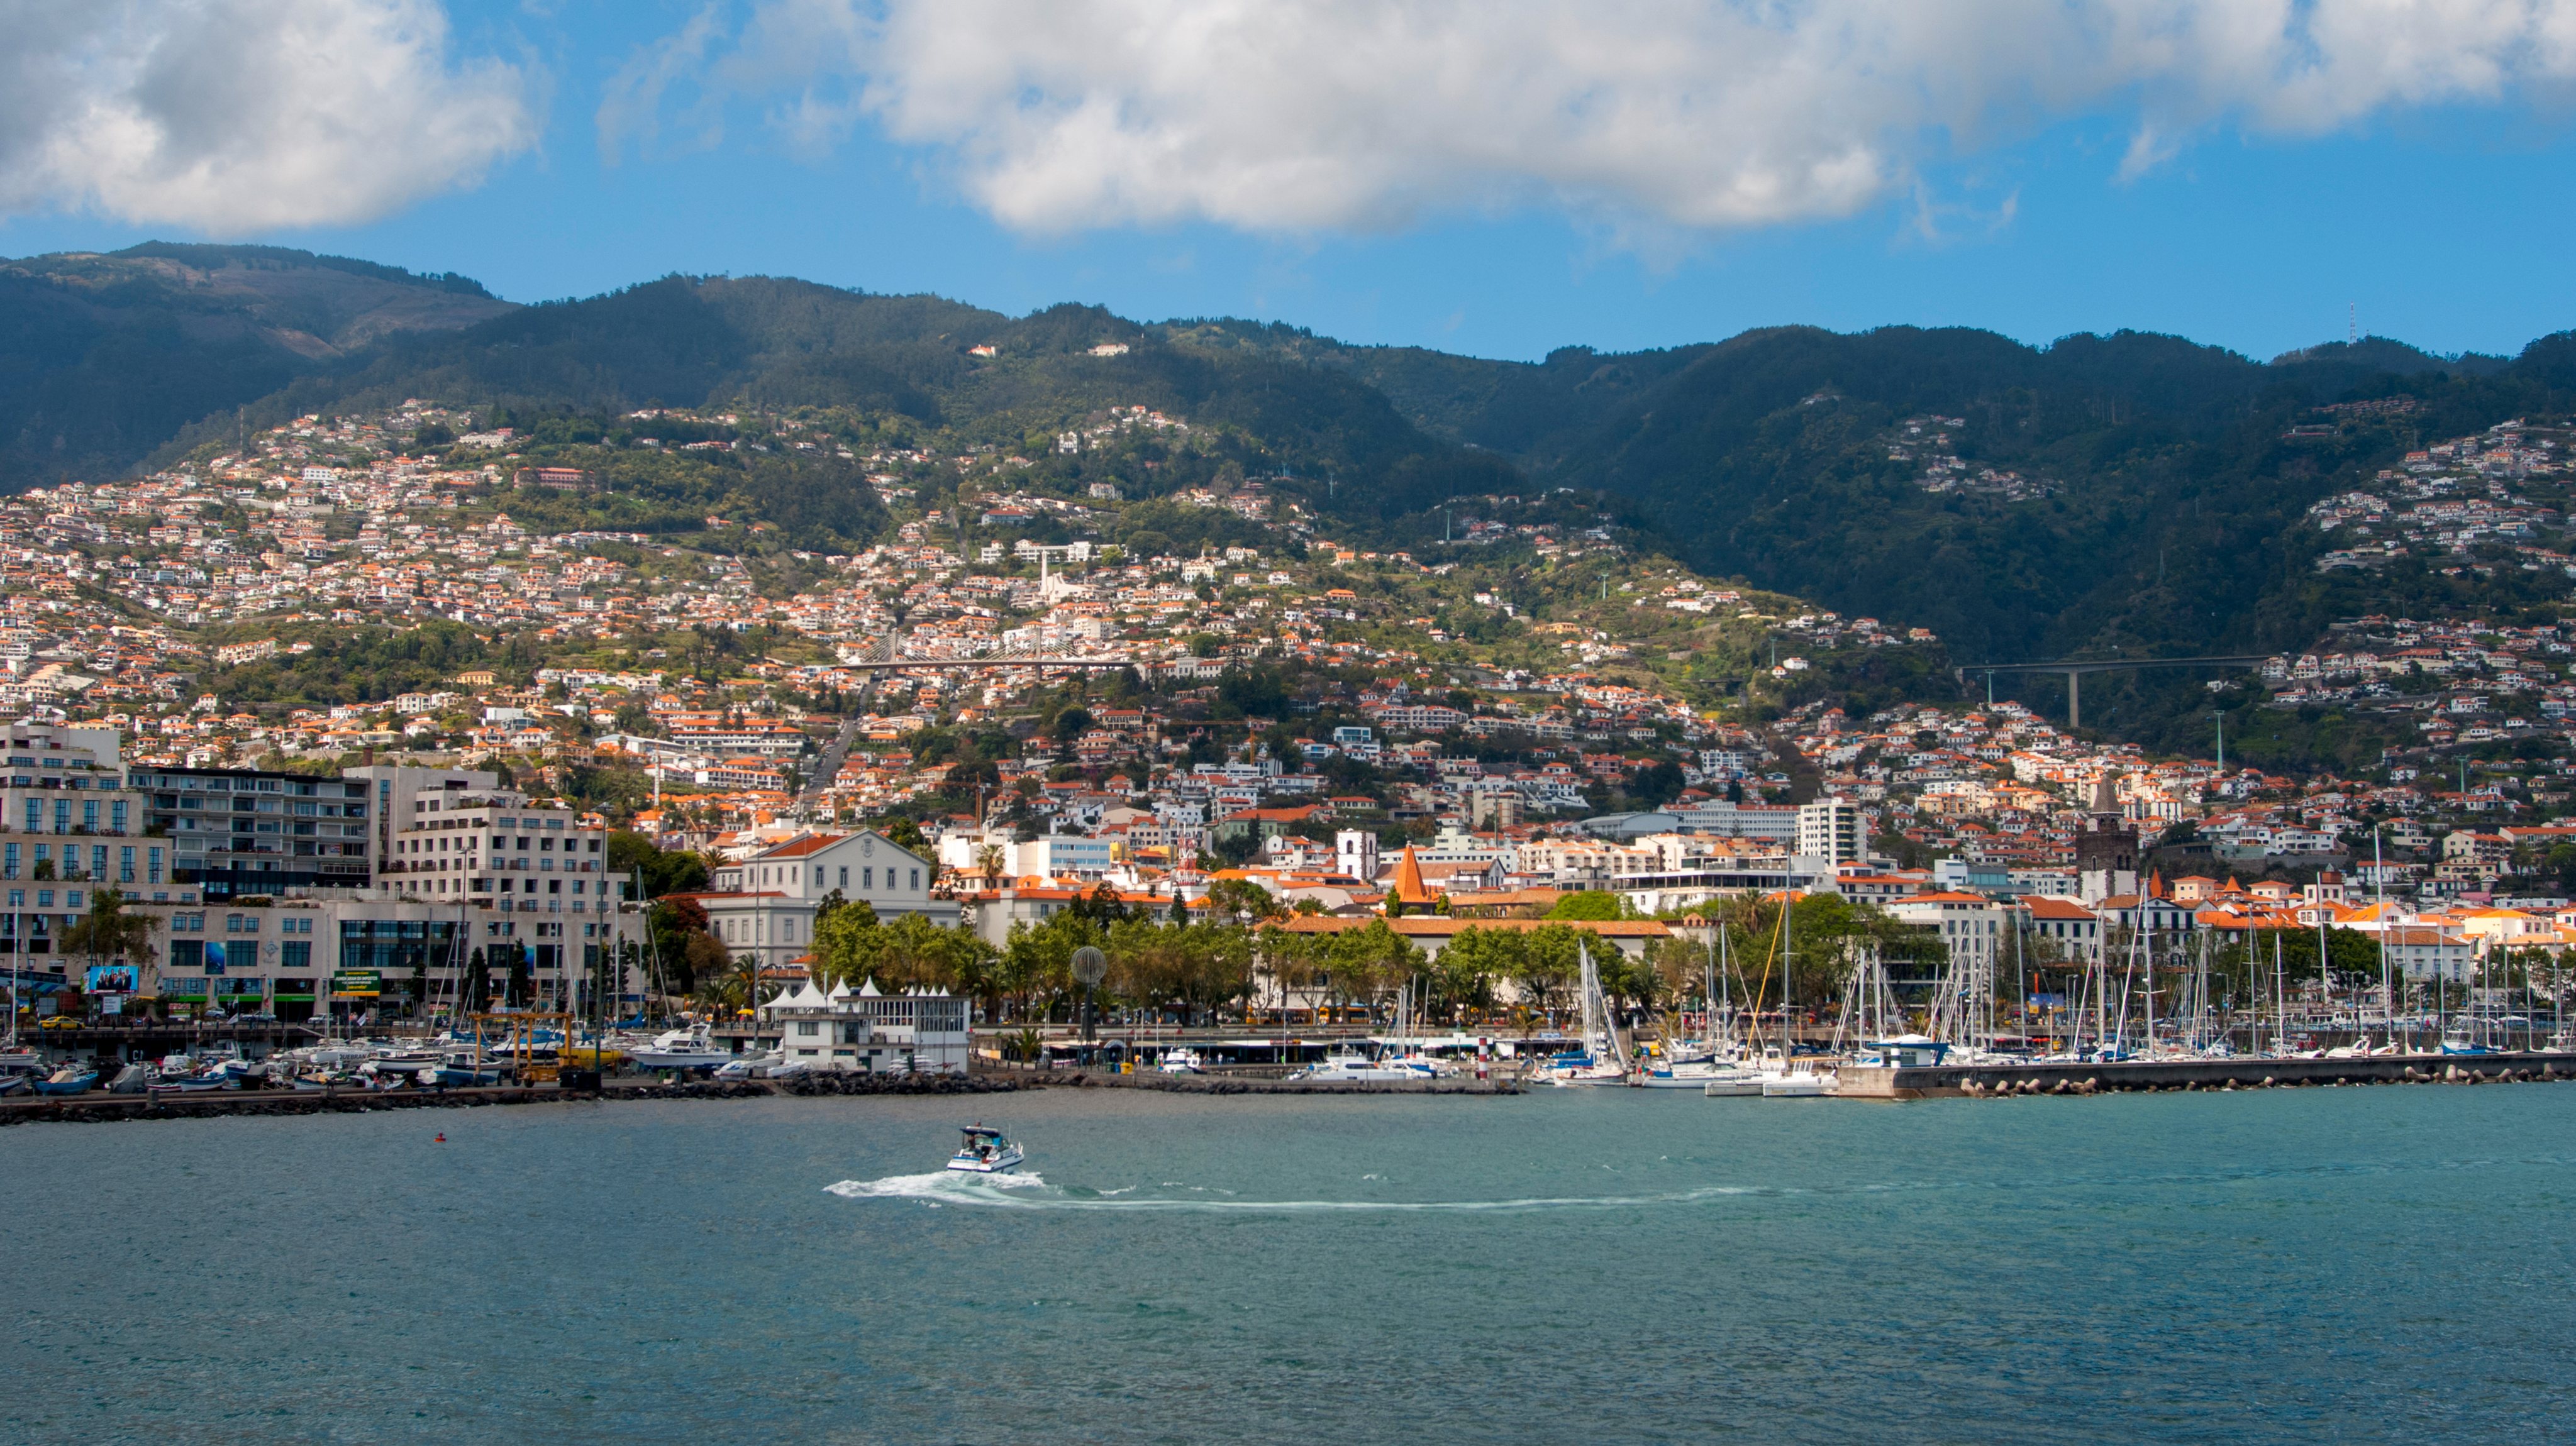 View of the city of Funchal on the Portuguese island of